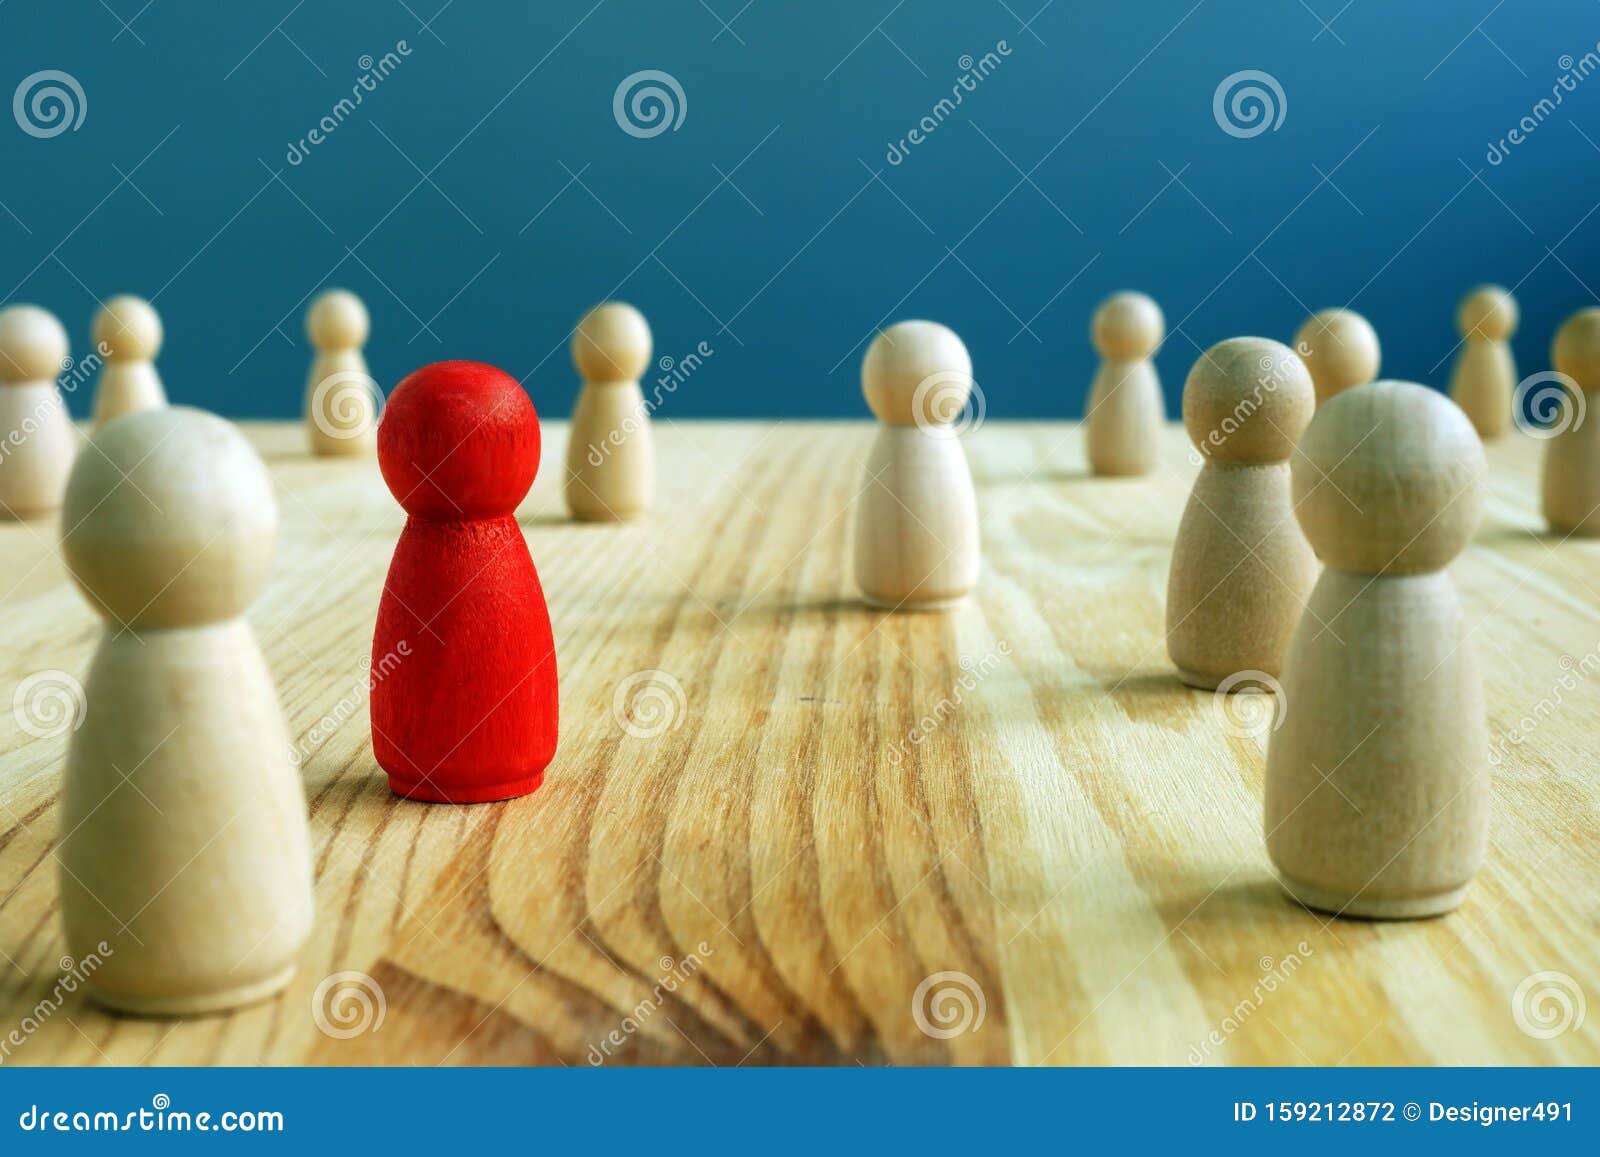 inclusion social concept. red figurine between wooden figurines